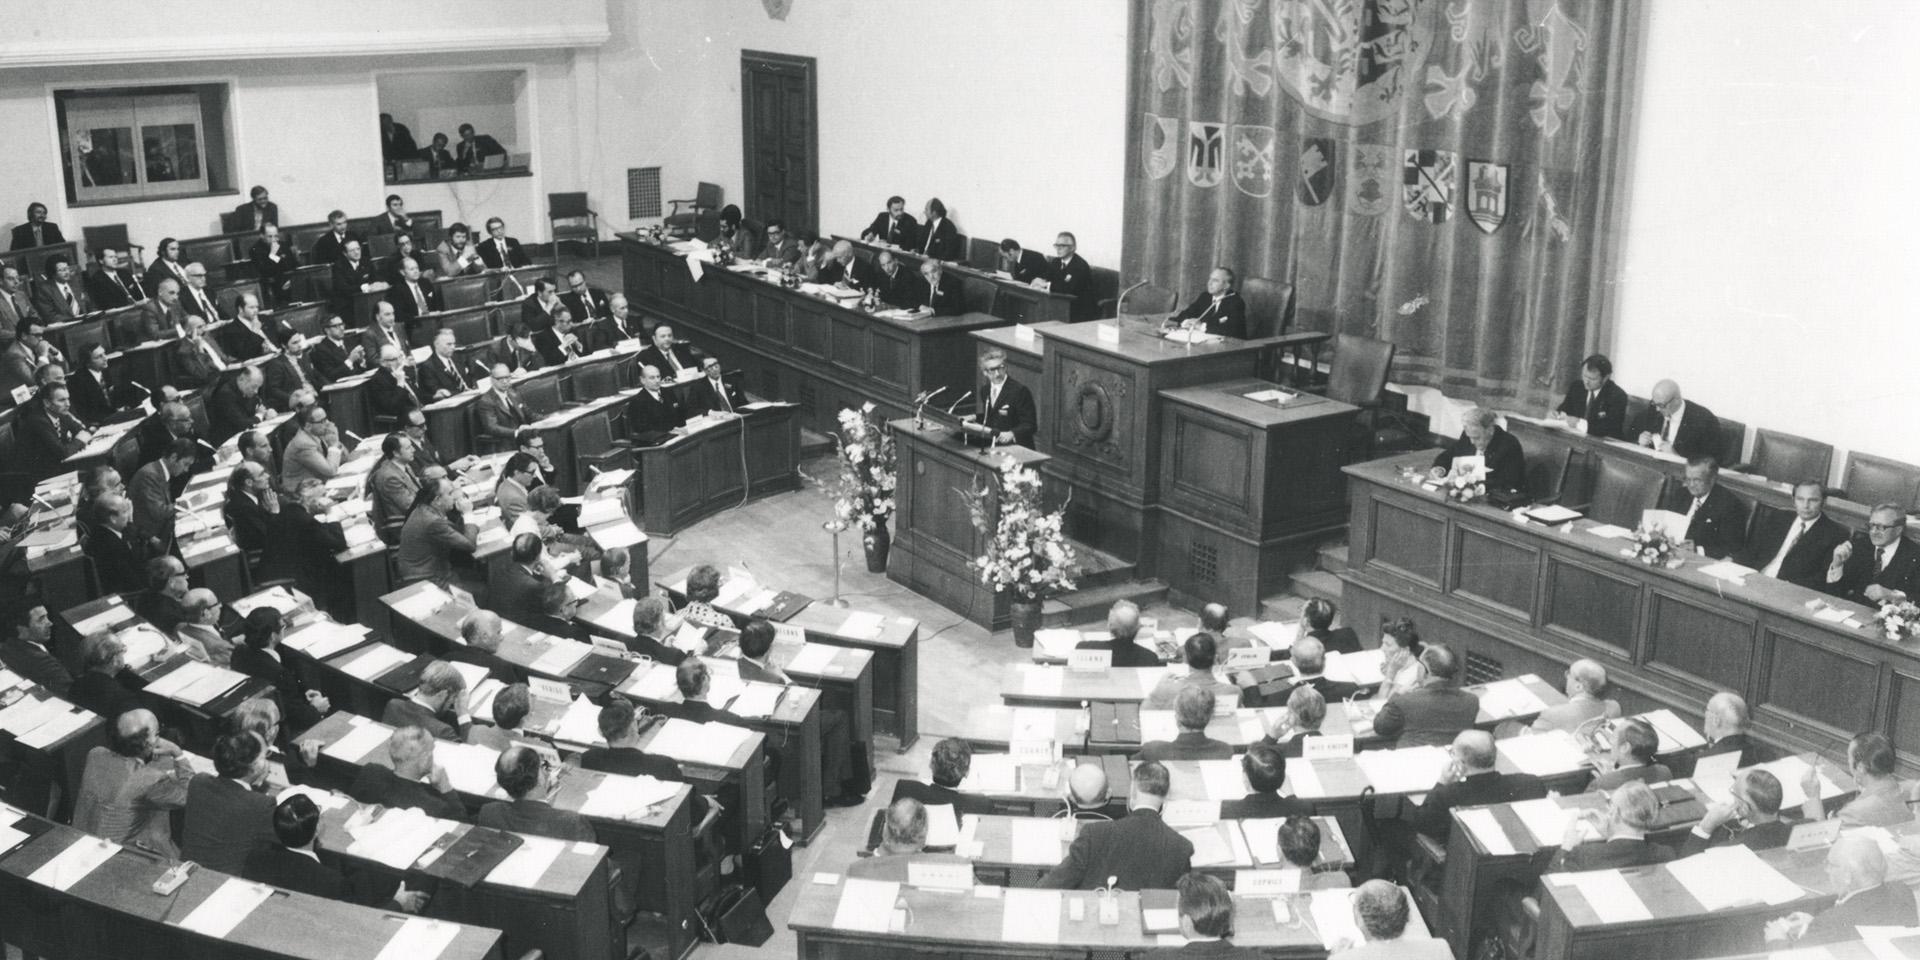 16 countries sign the European Patent Convention (EPC) in Munich in 1973